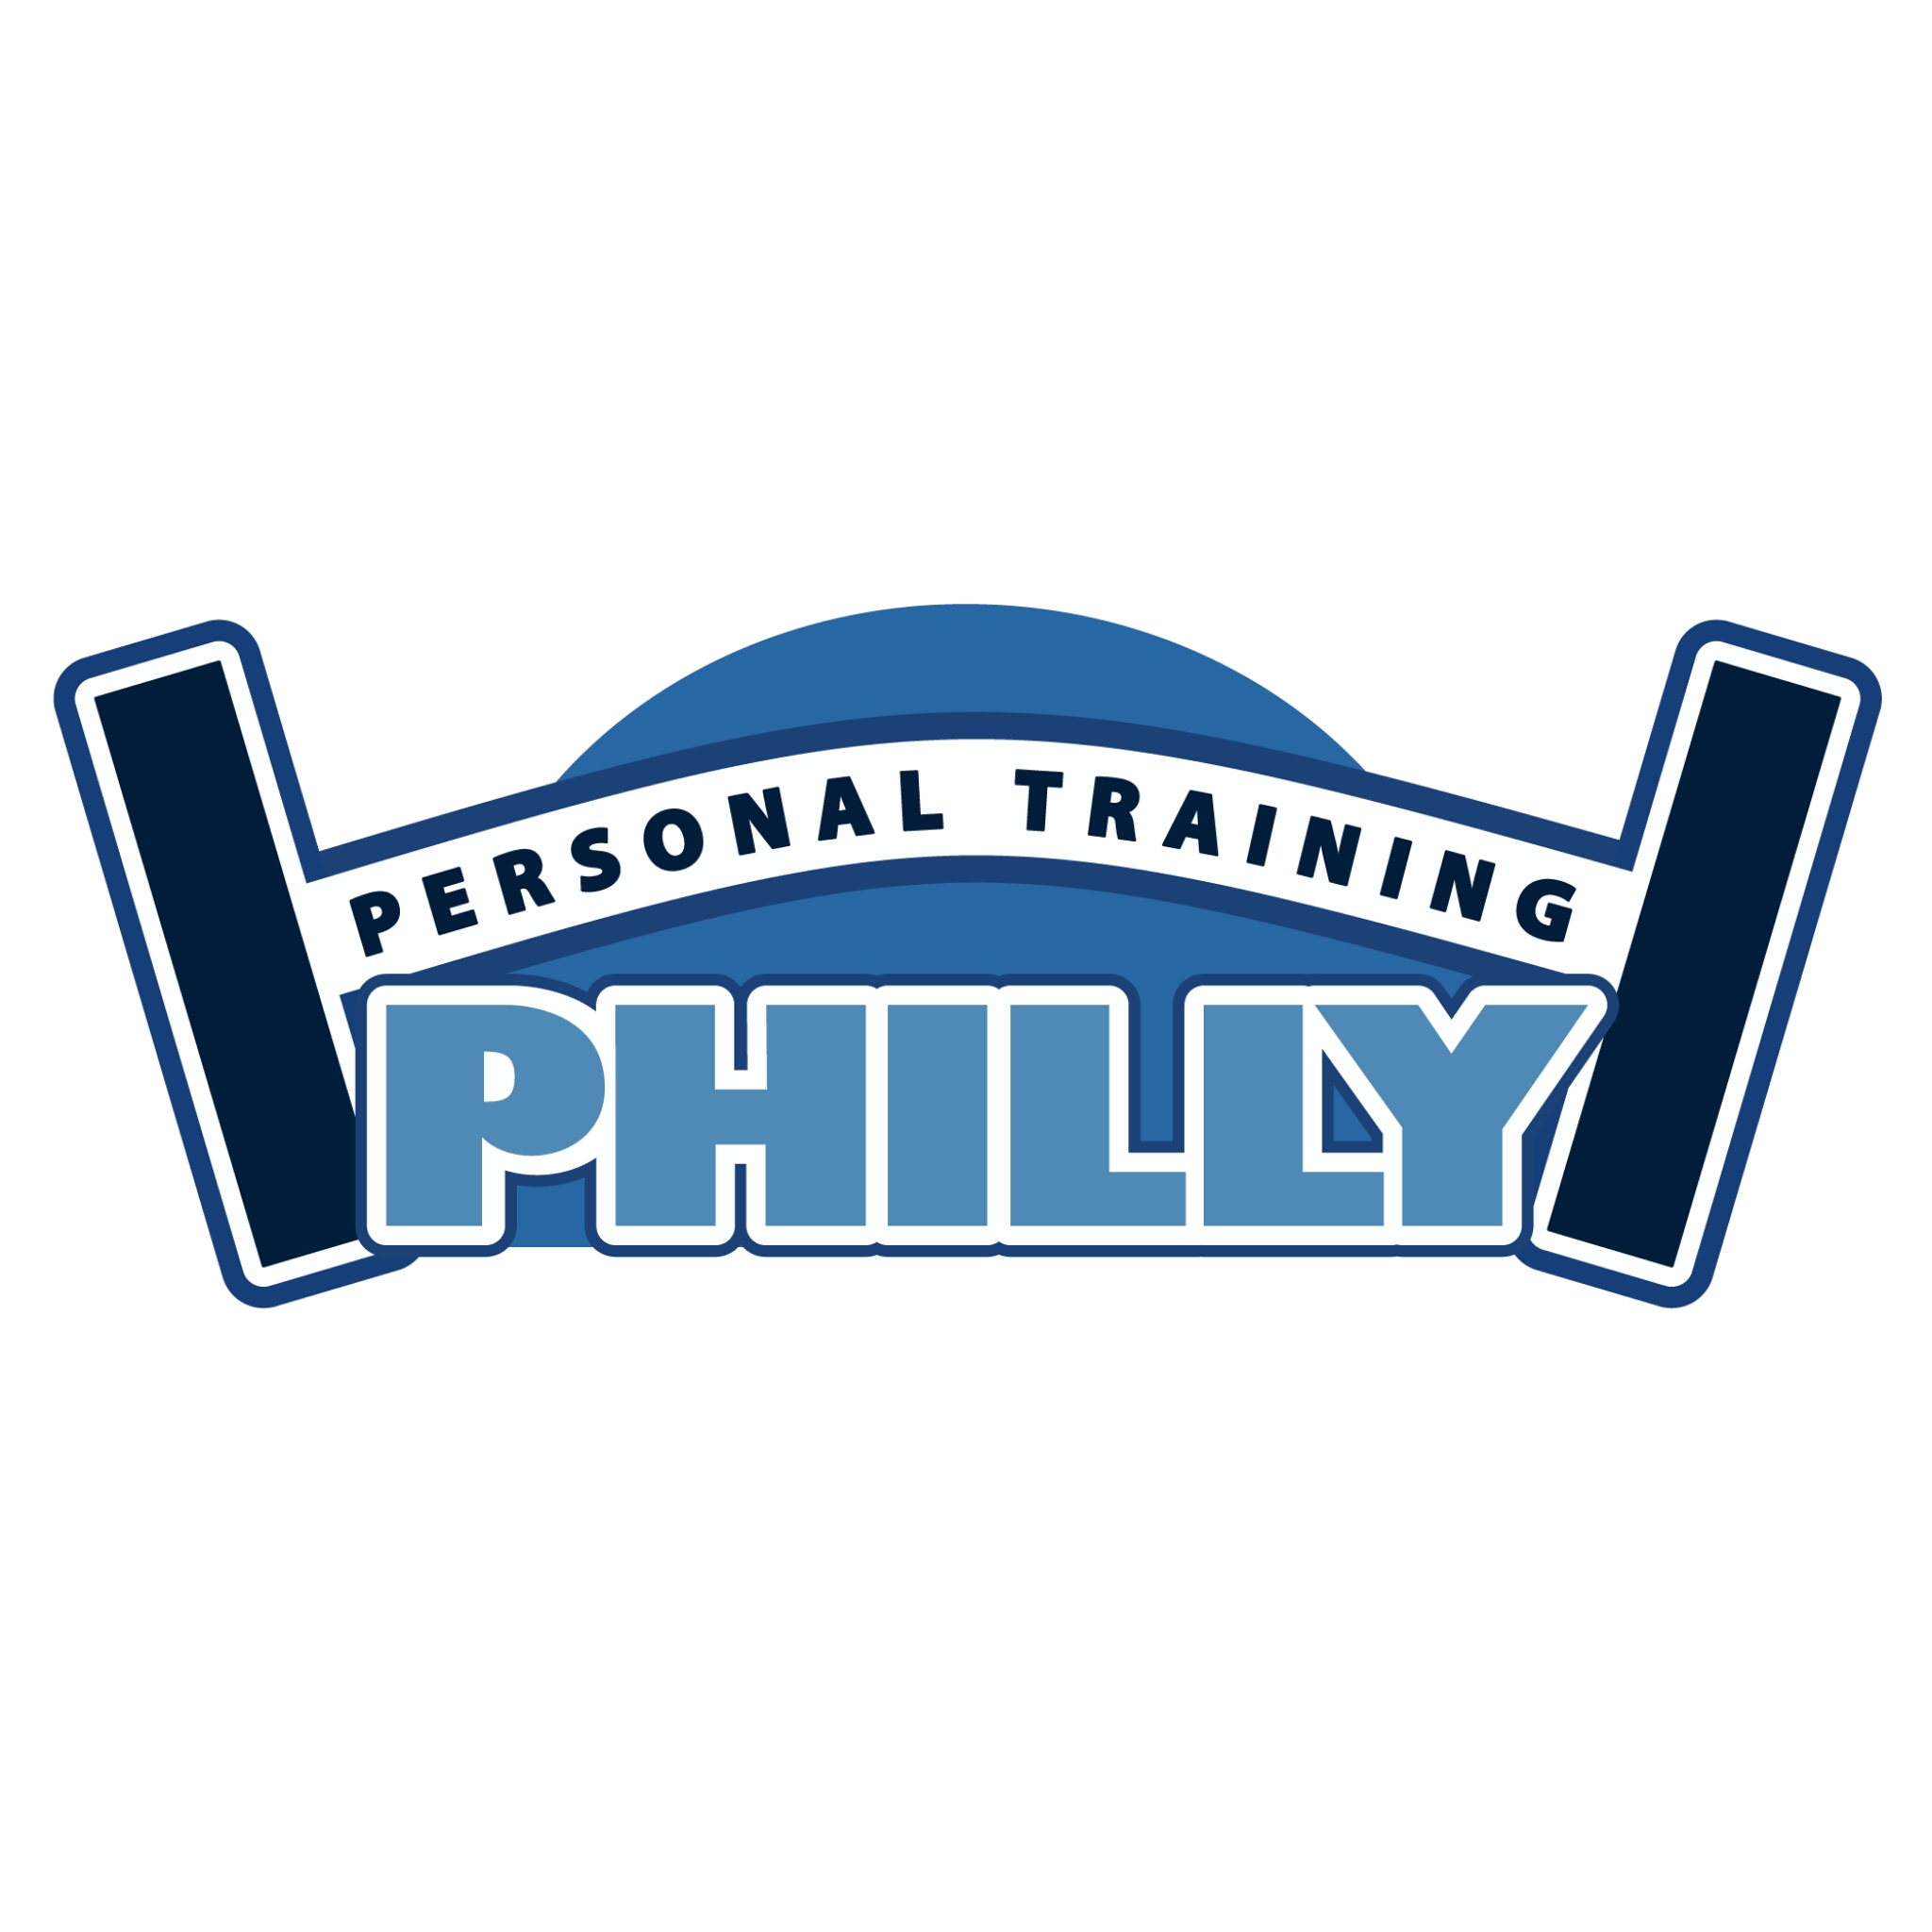 Philly Personal Training Photo